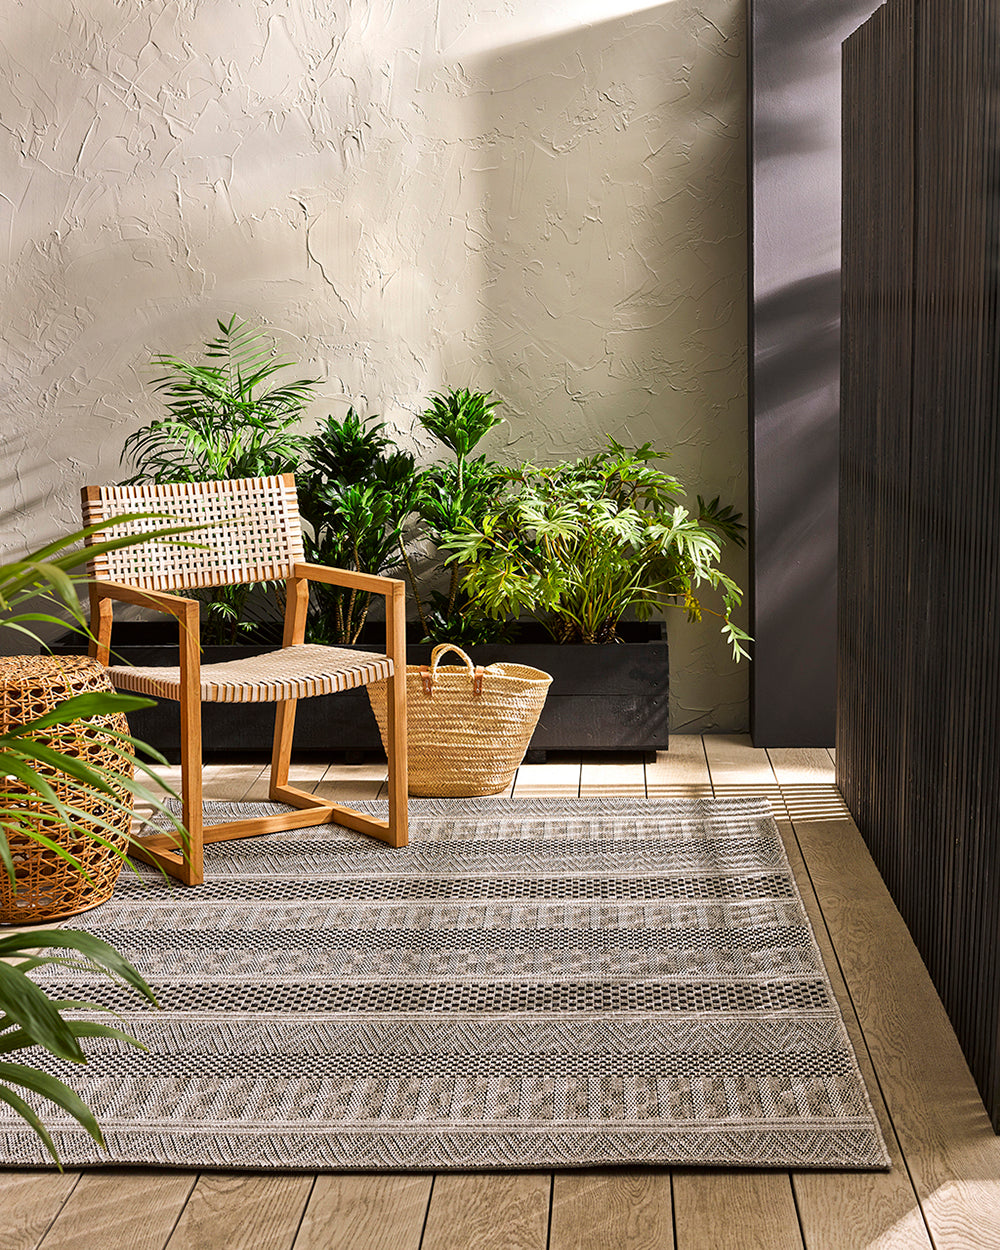 Peru outdoor rug with a chair and basket alongside with foliage in the background